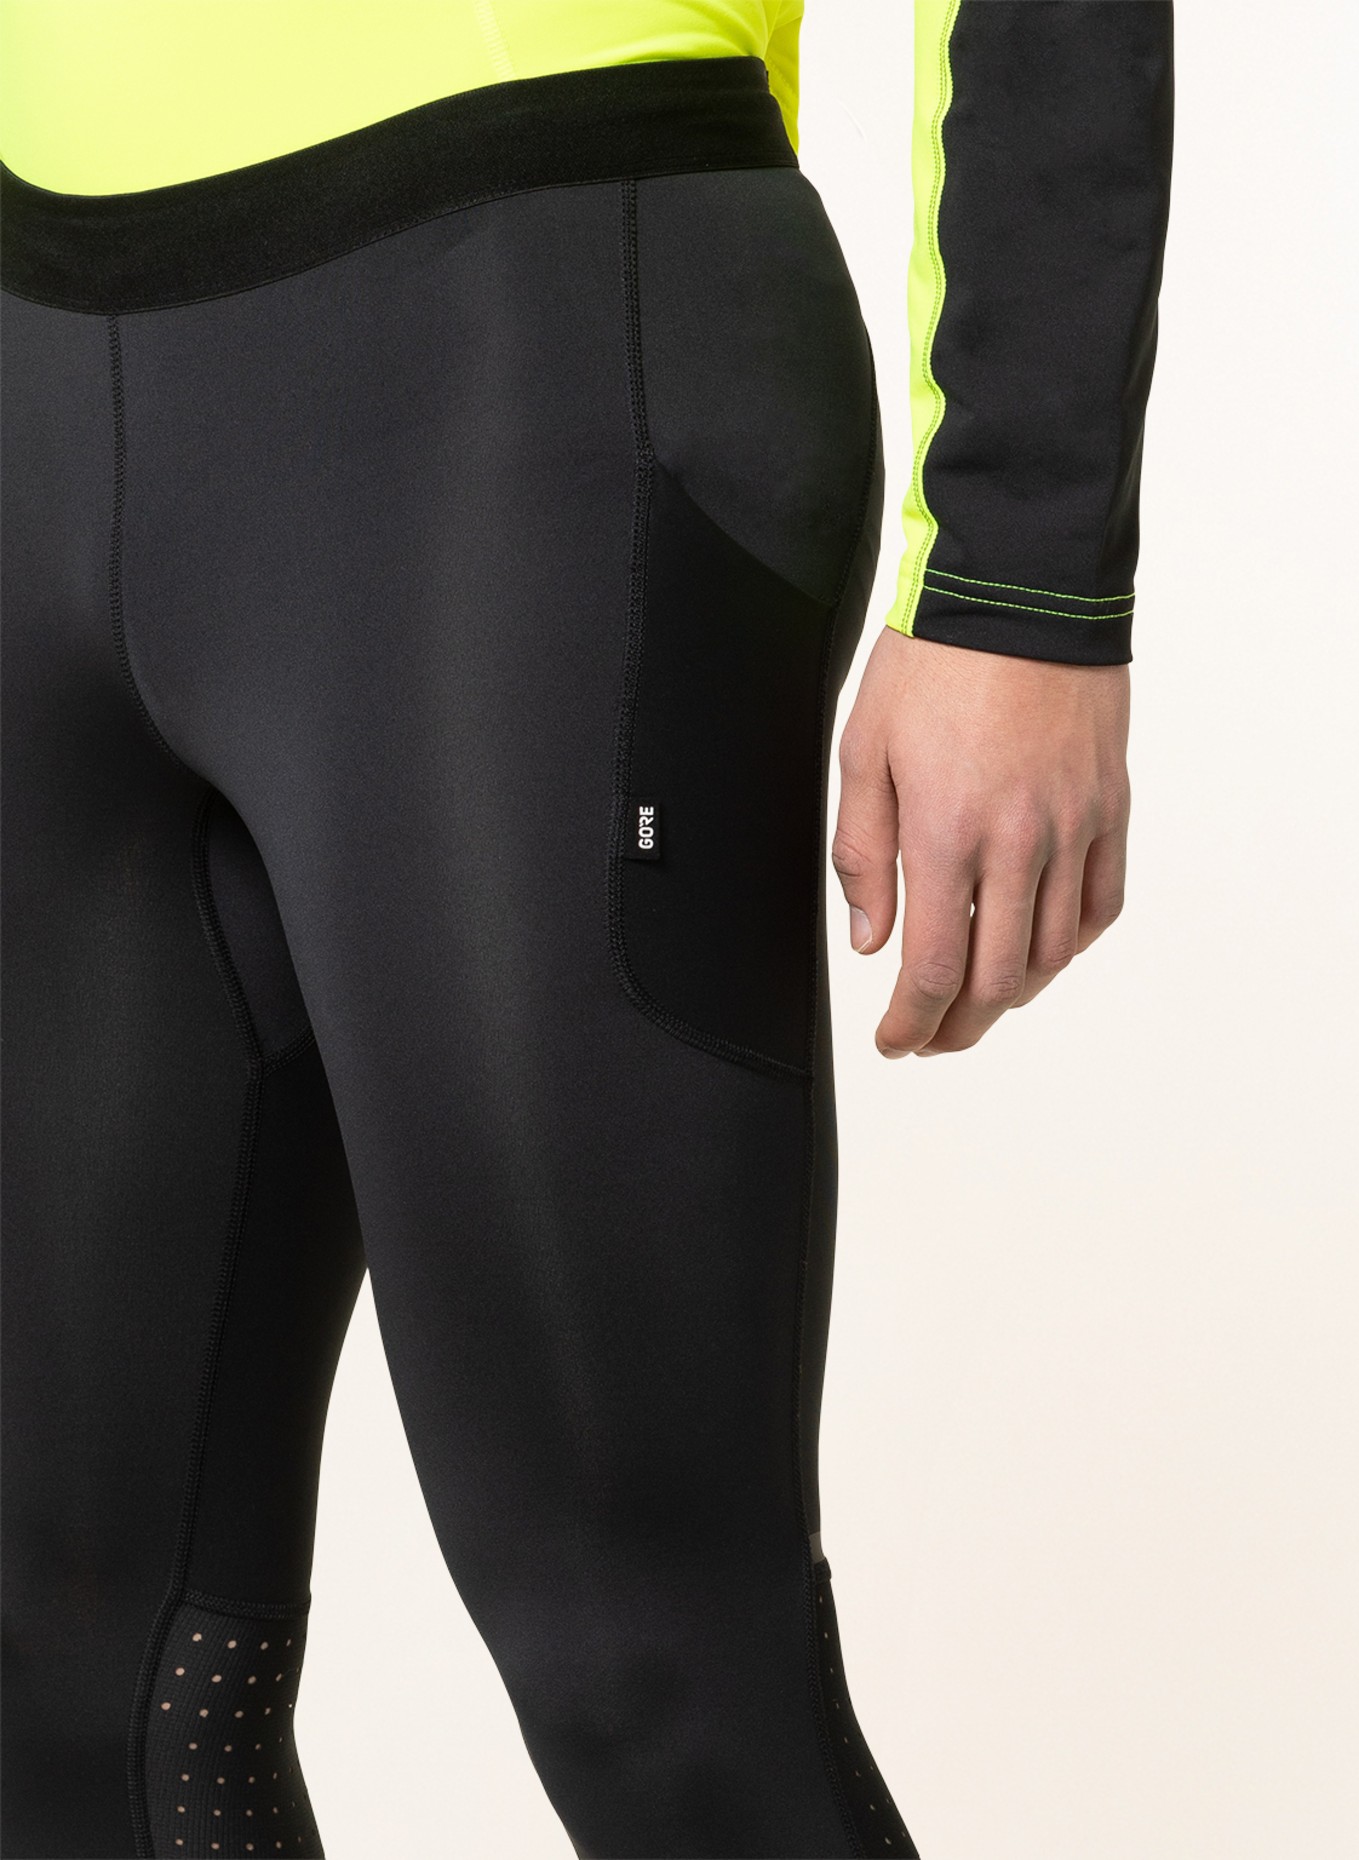 GORE RUNNING WEAR Tights IMPULSE with mesh inserts, Color: BLACK (Image 5)